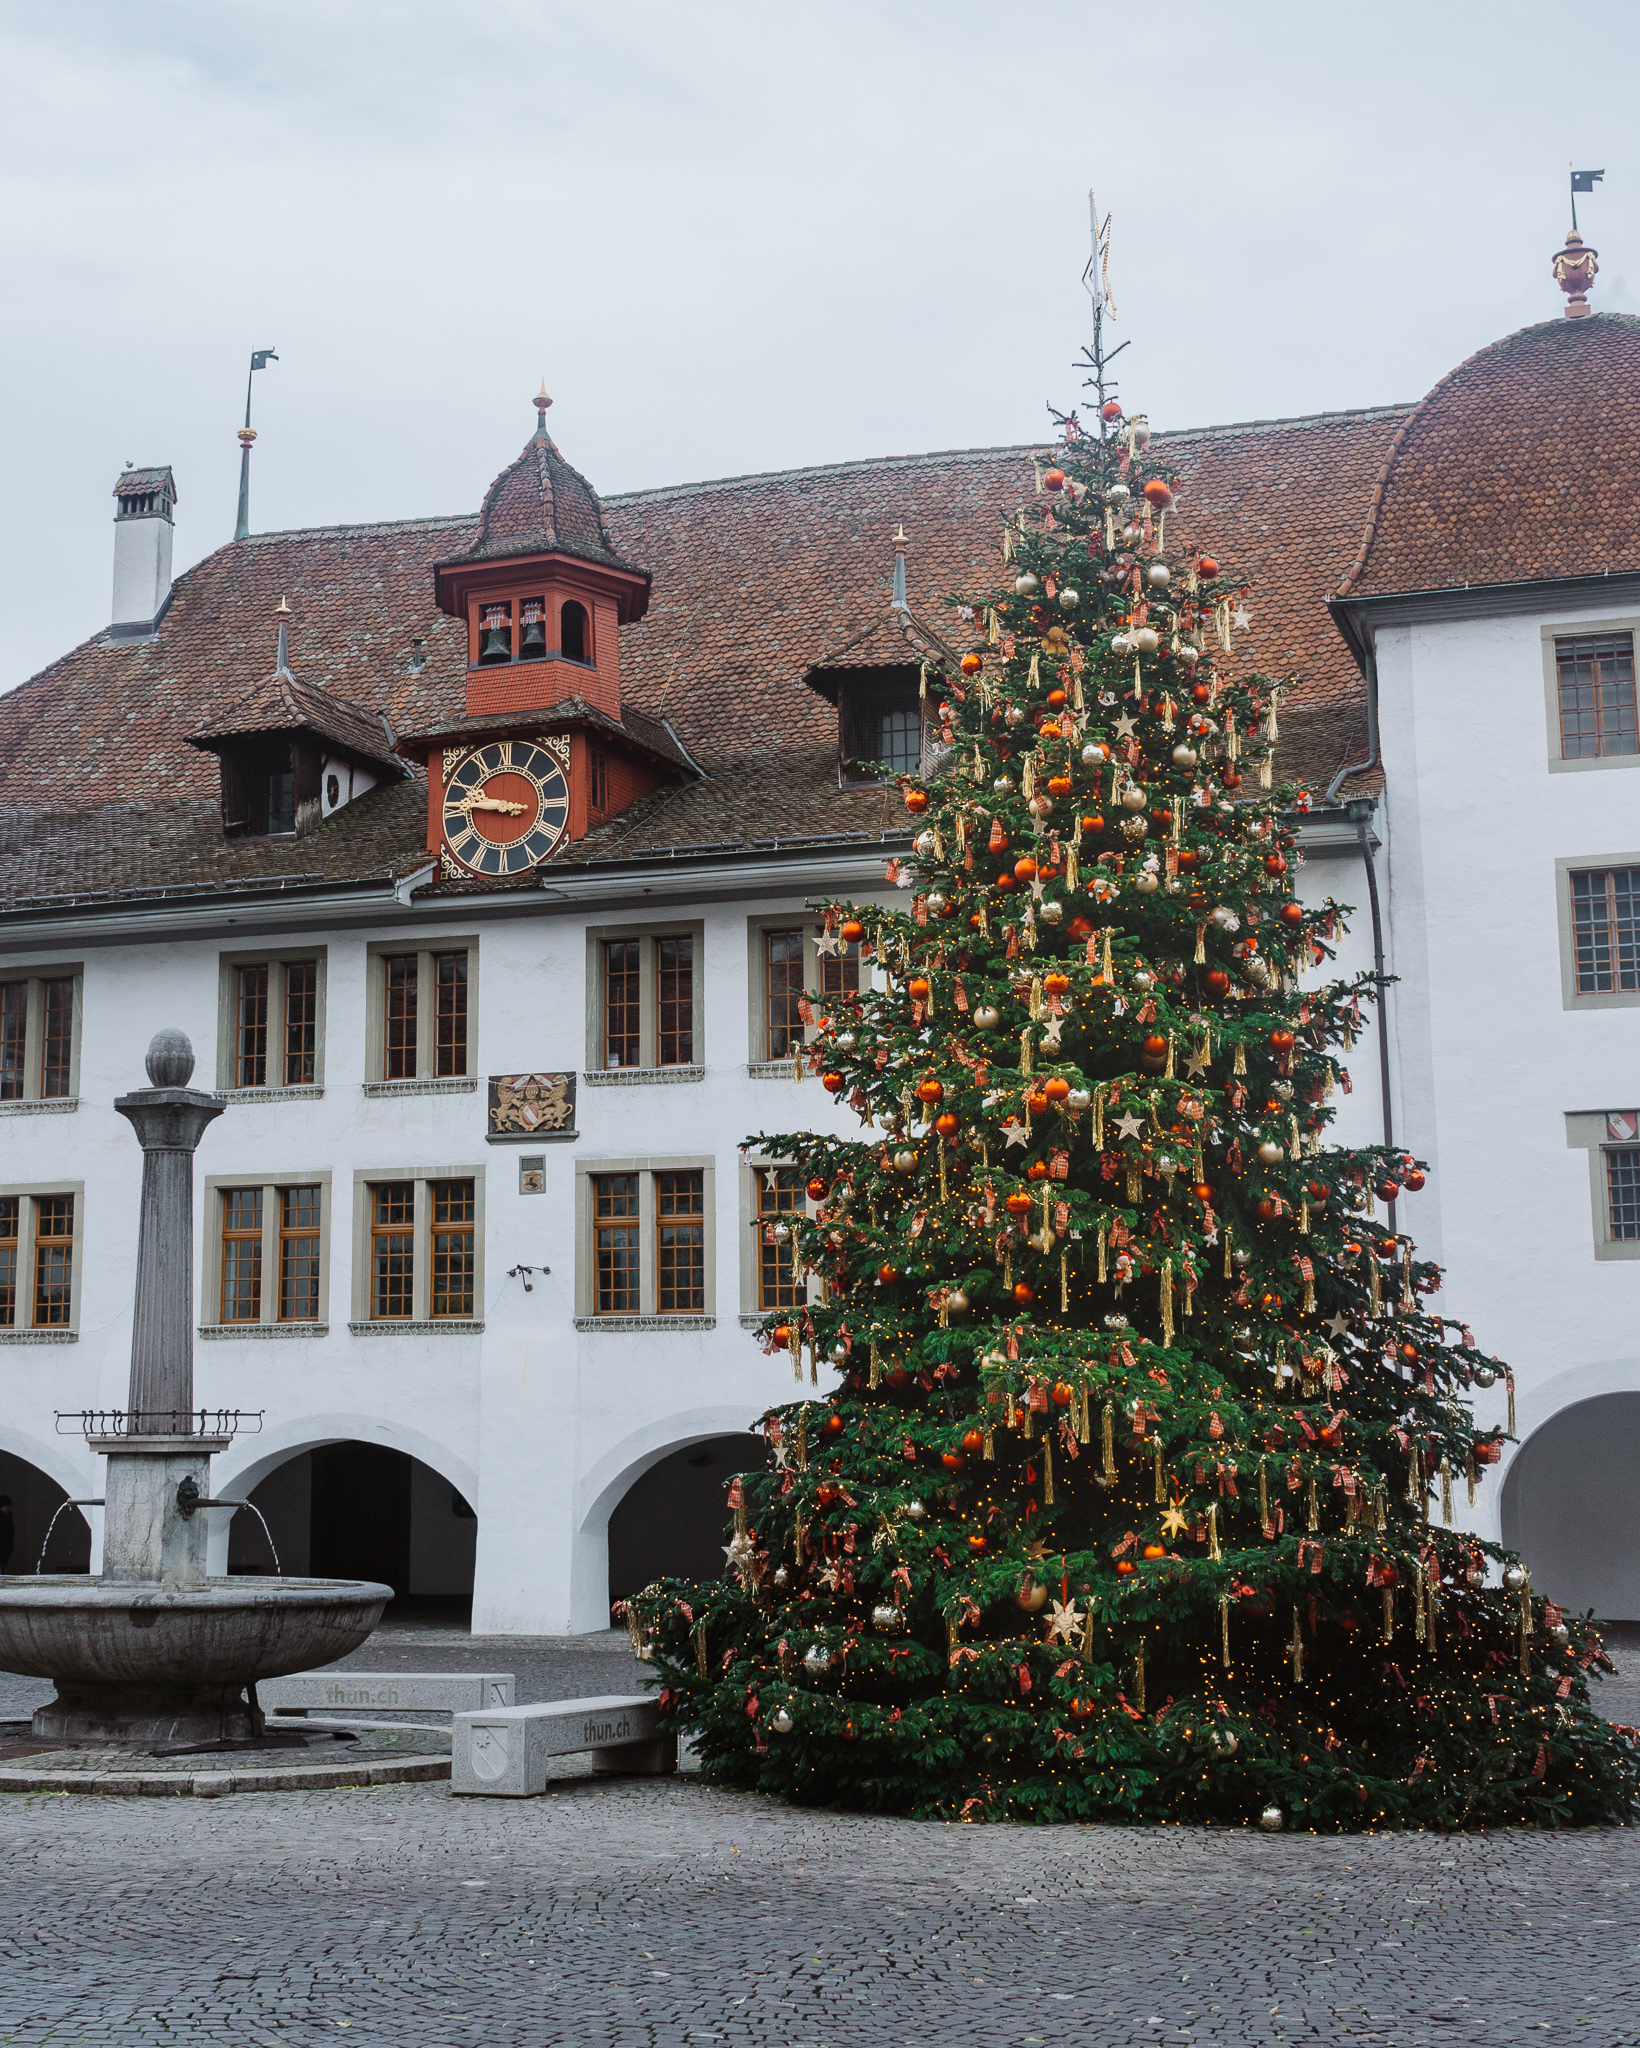 A large Christmas tree extravagantly decorated with stars and red baubles, in front if a historic Swiss building with a clock on it.